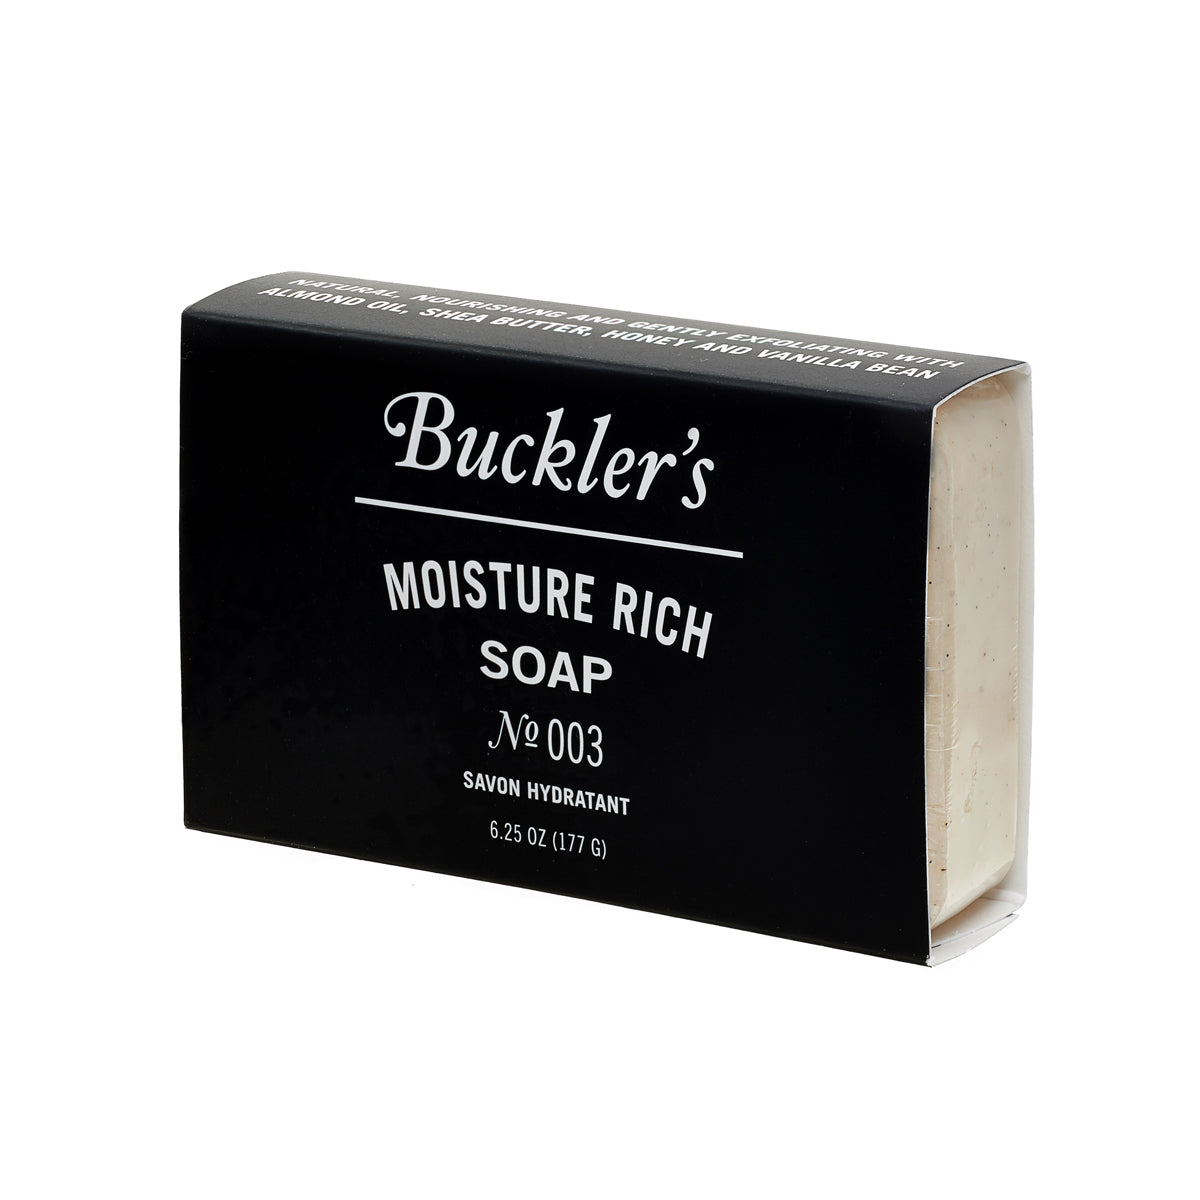 The Buckler's Moisture Rich Soap bar in a black sleeve against a white background.